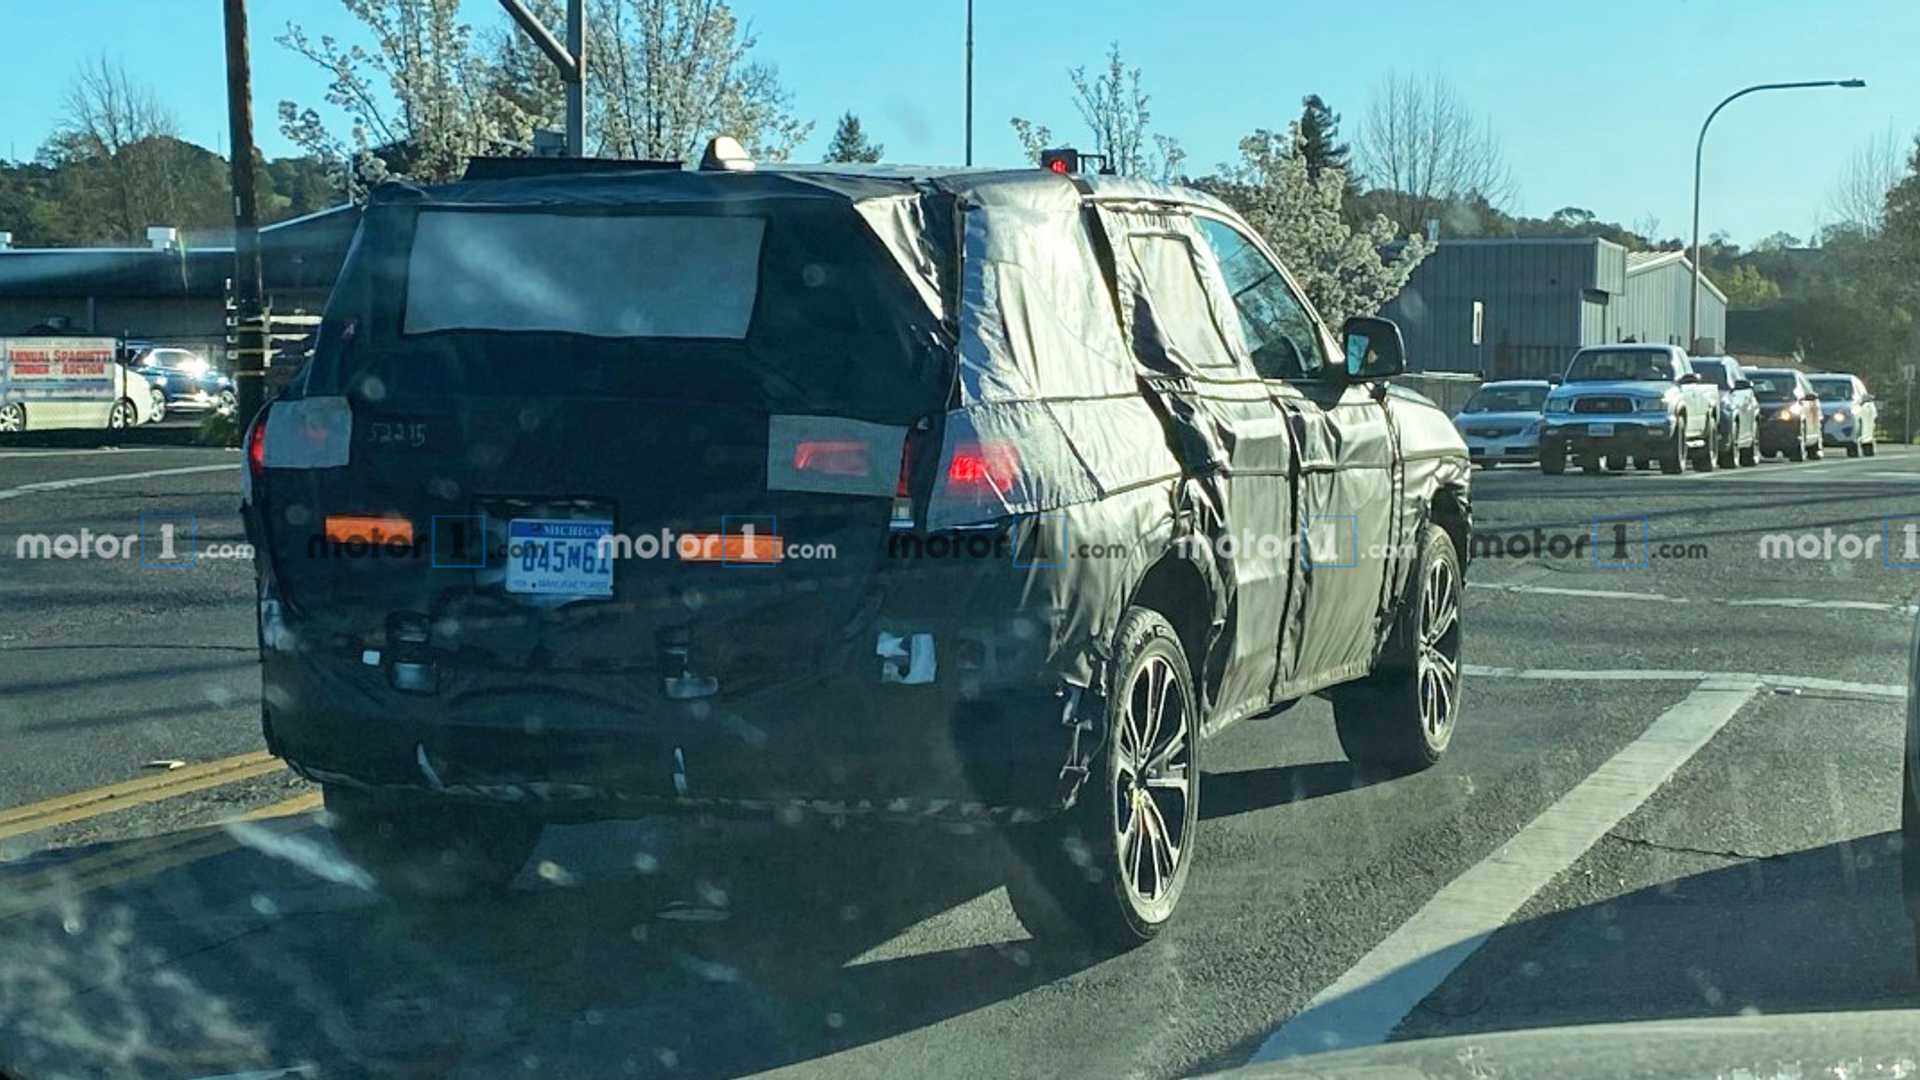 2021 jeep grand cherokee spied showing taillights at